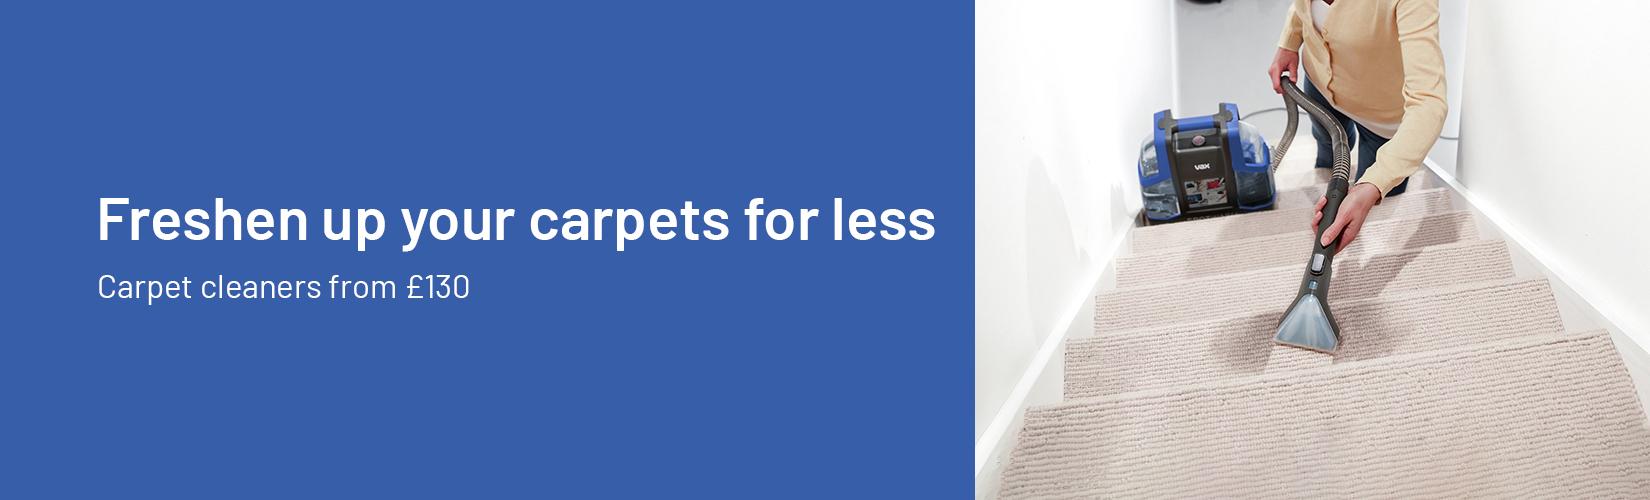 Freshen up your carpets for less. Carpet cleaners from £130.